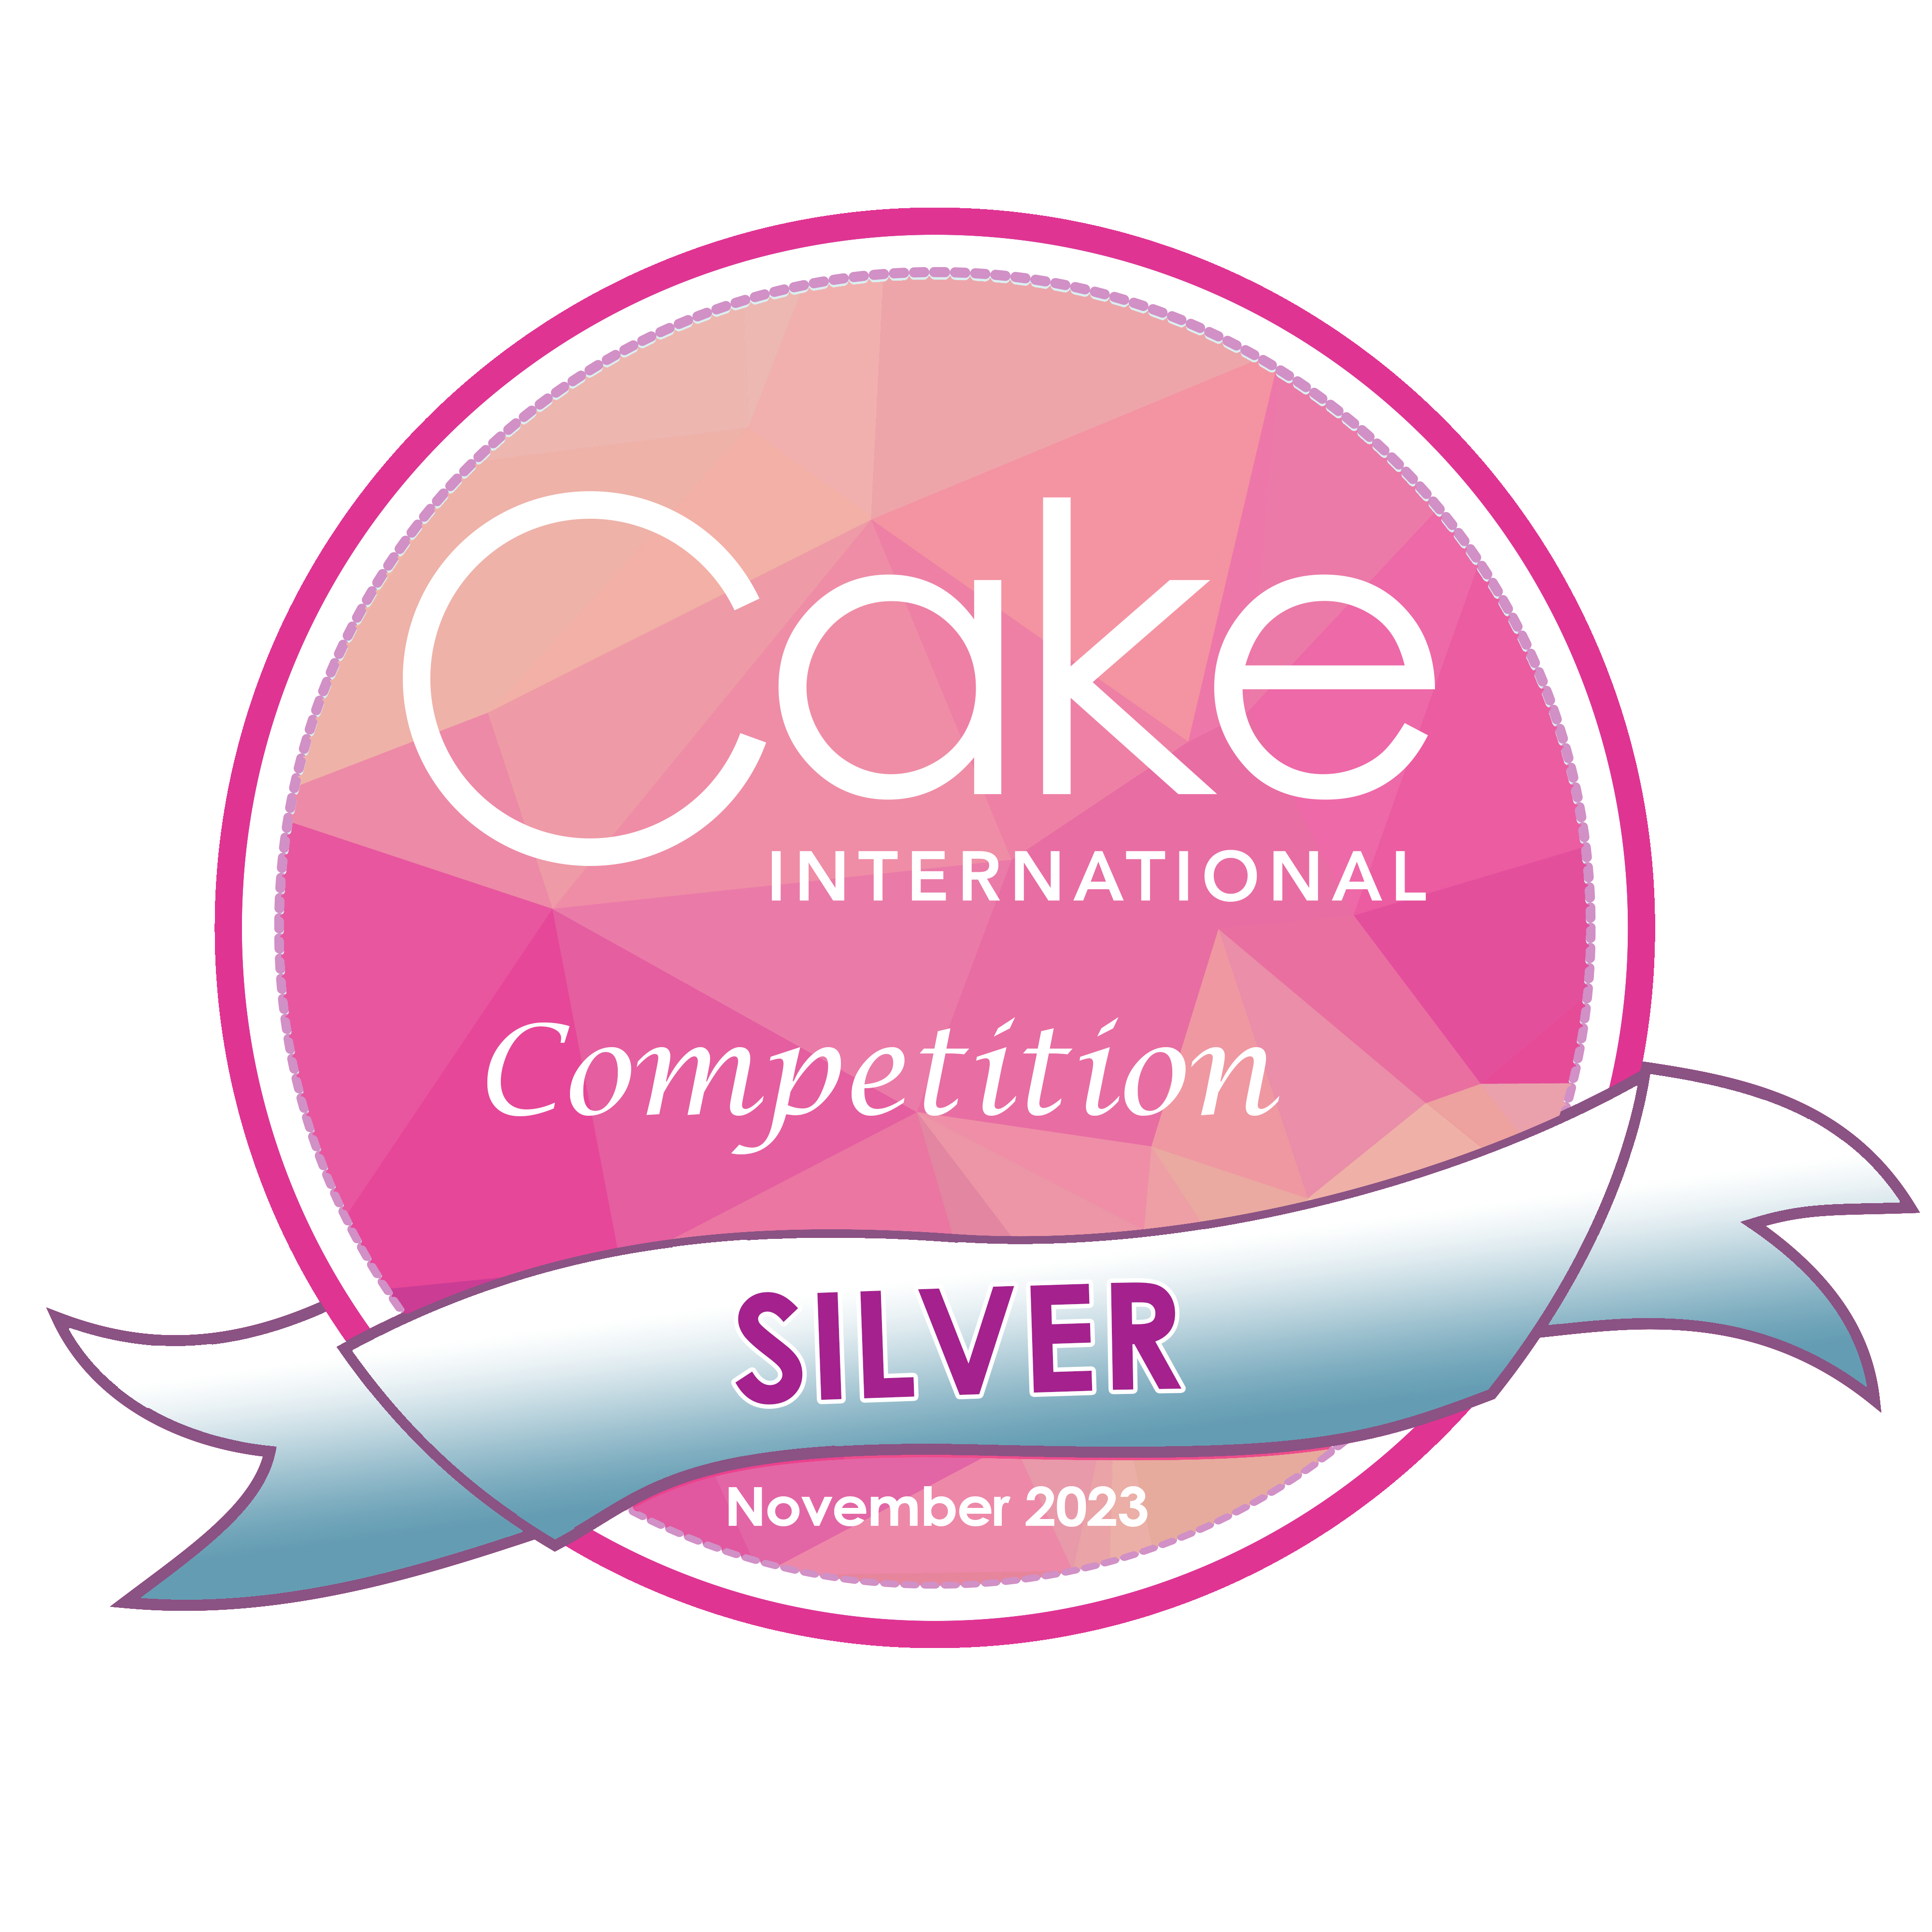 Cake International Competition 2023 - Silver Badge